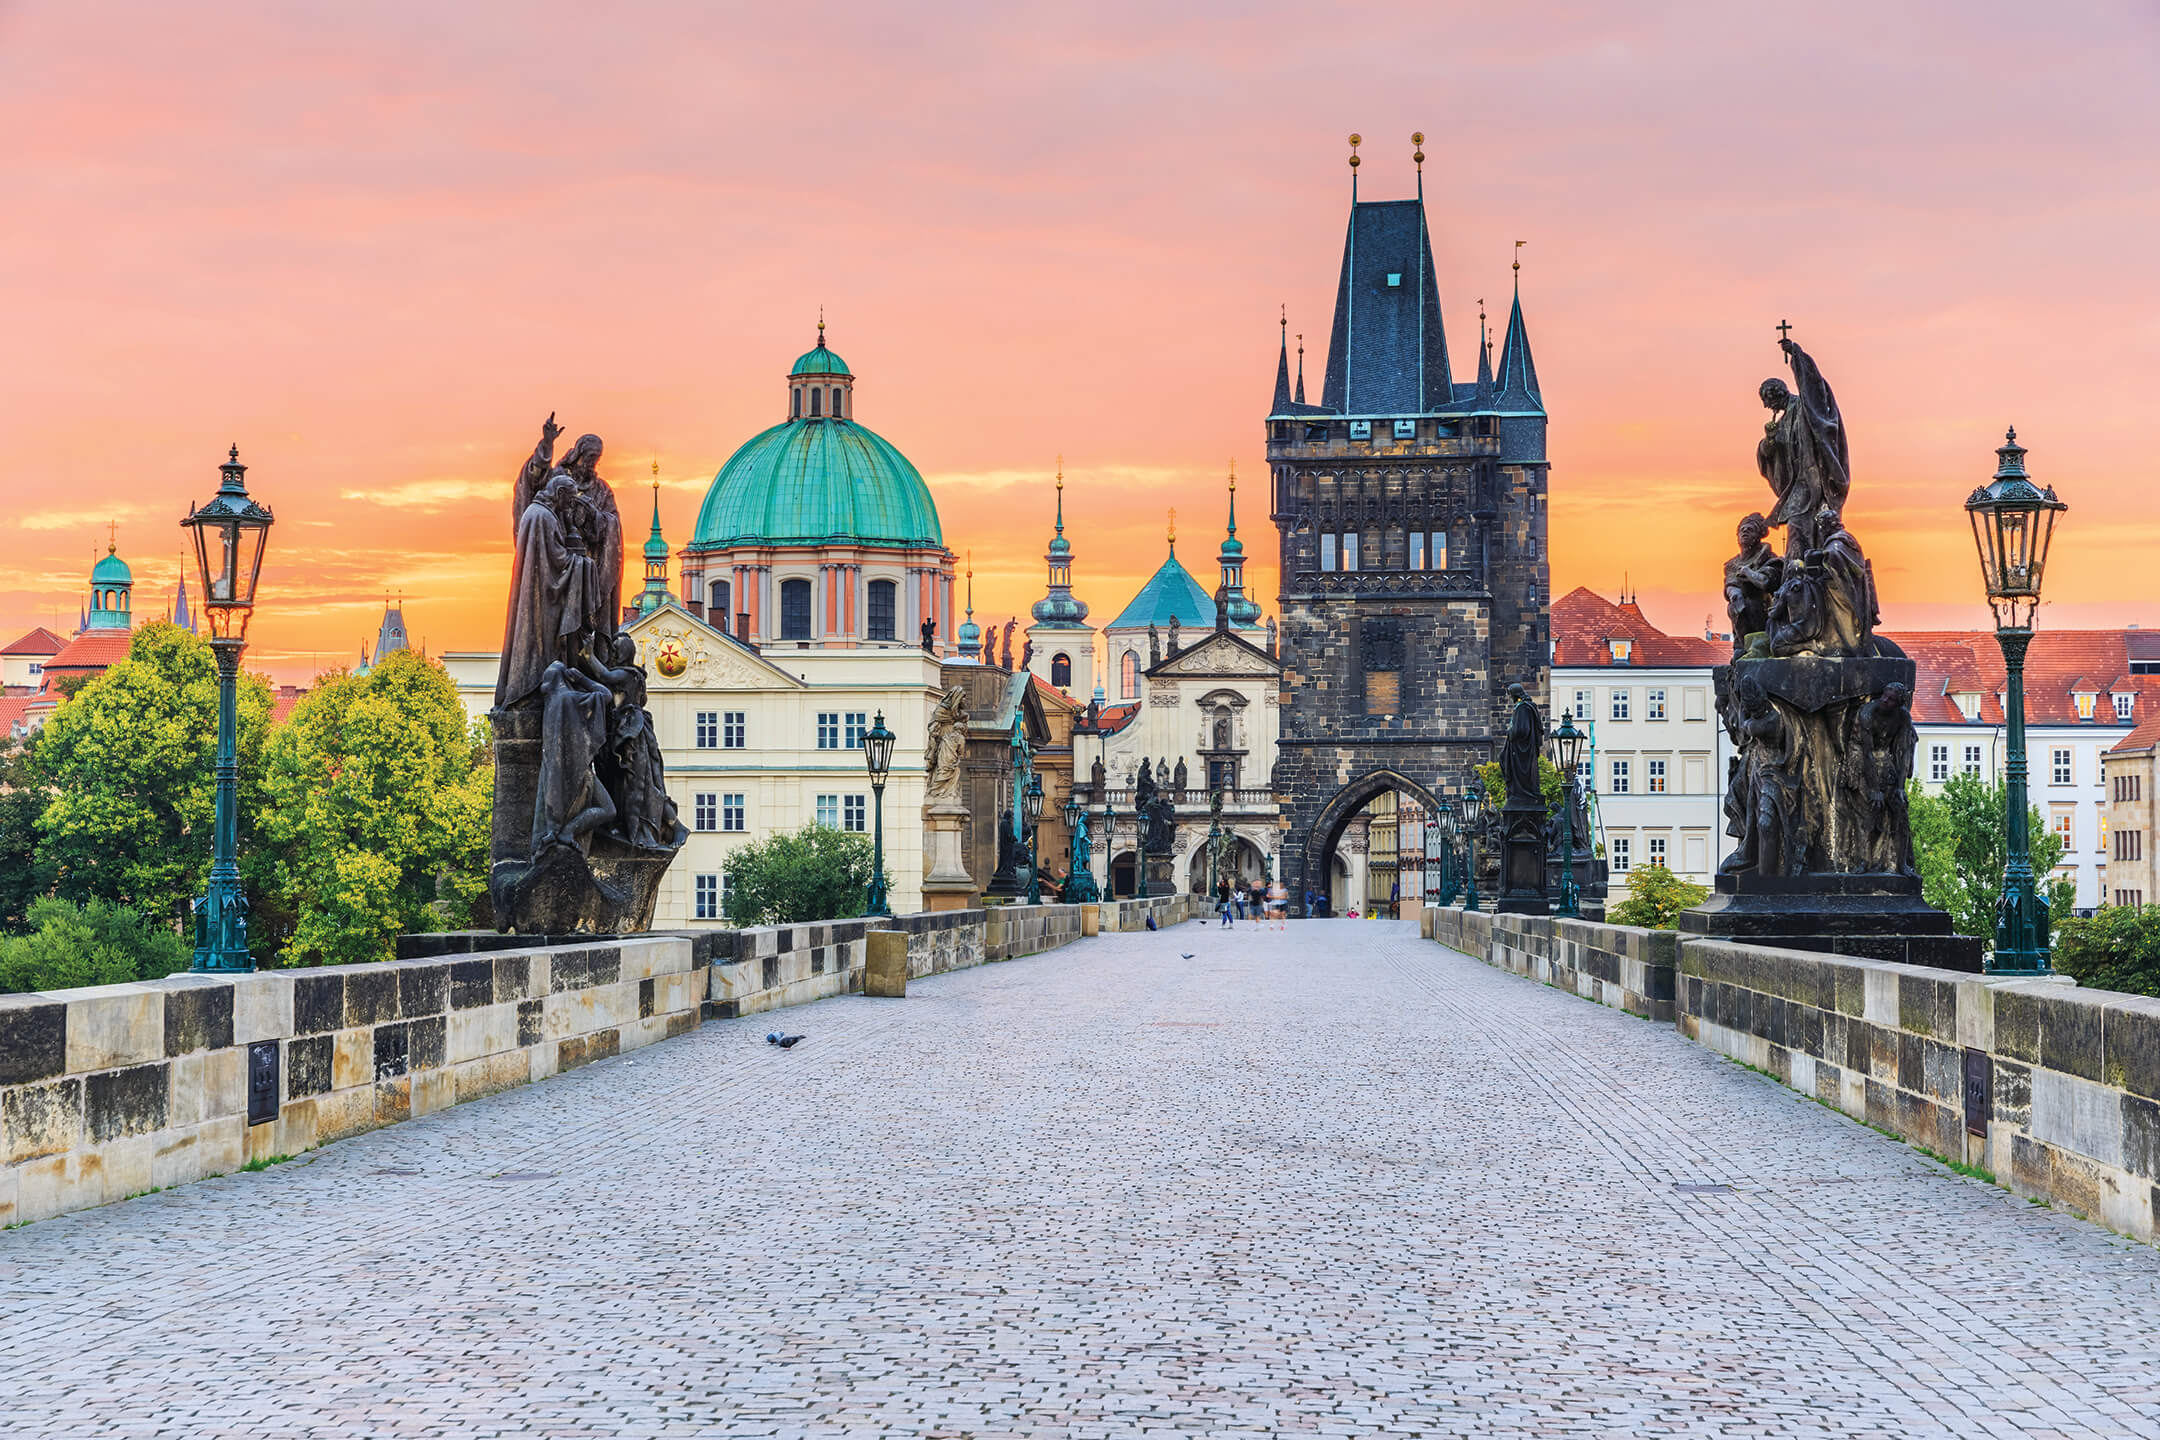 Prague-nosis Travel—It’s Time for a Czech Up! - Go Next